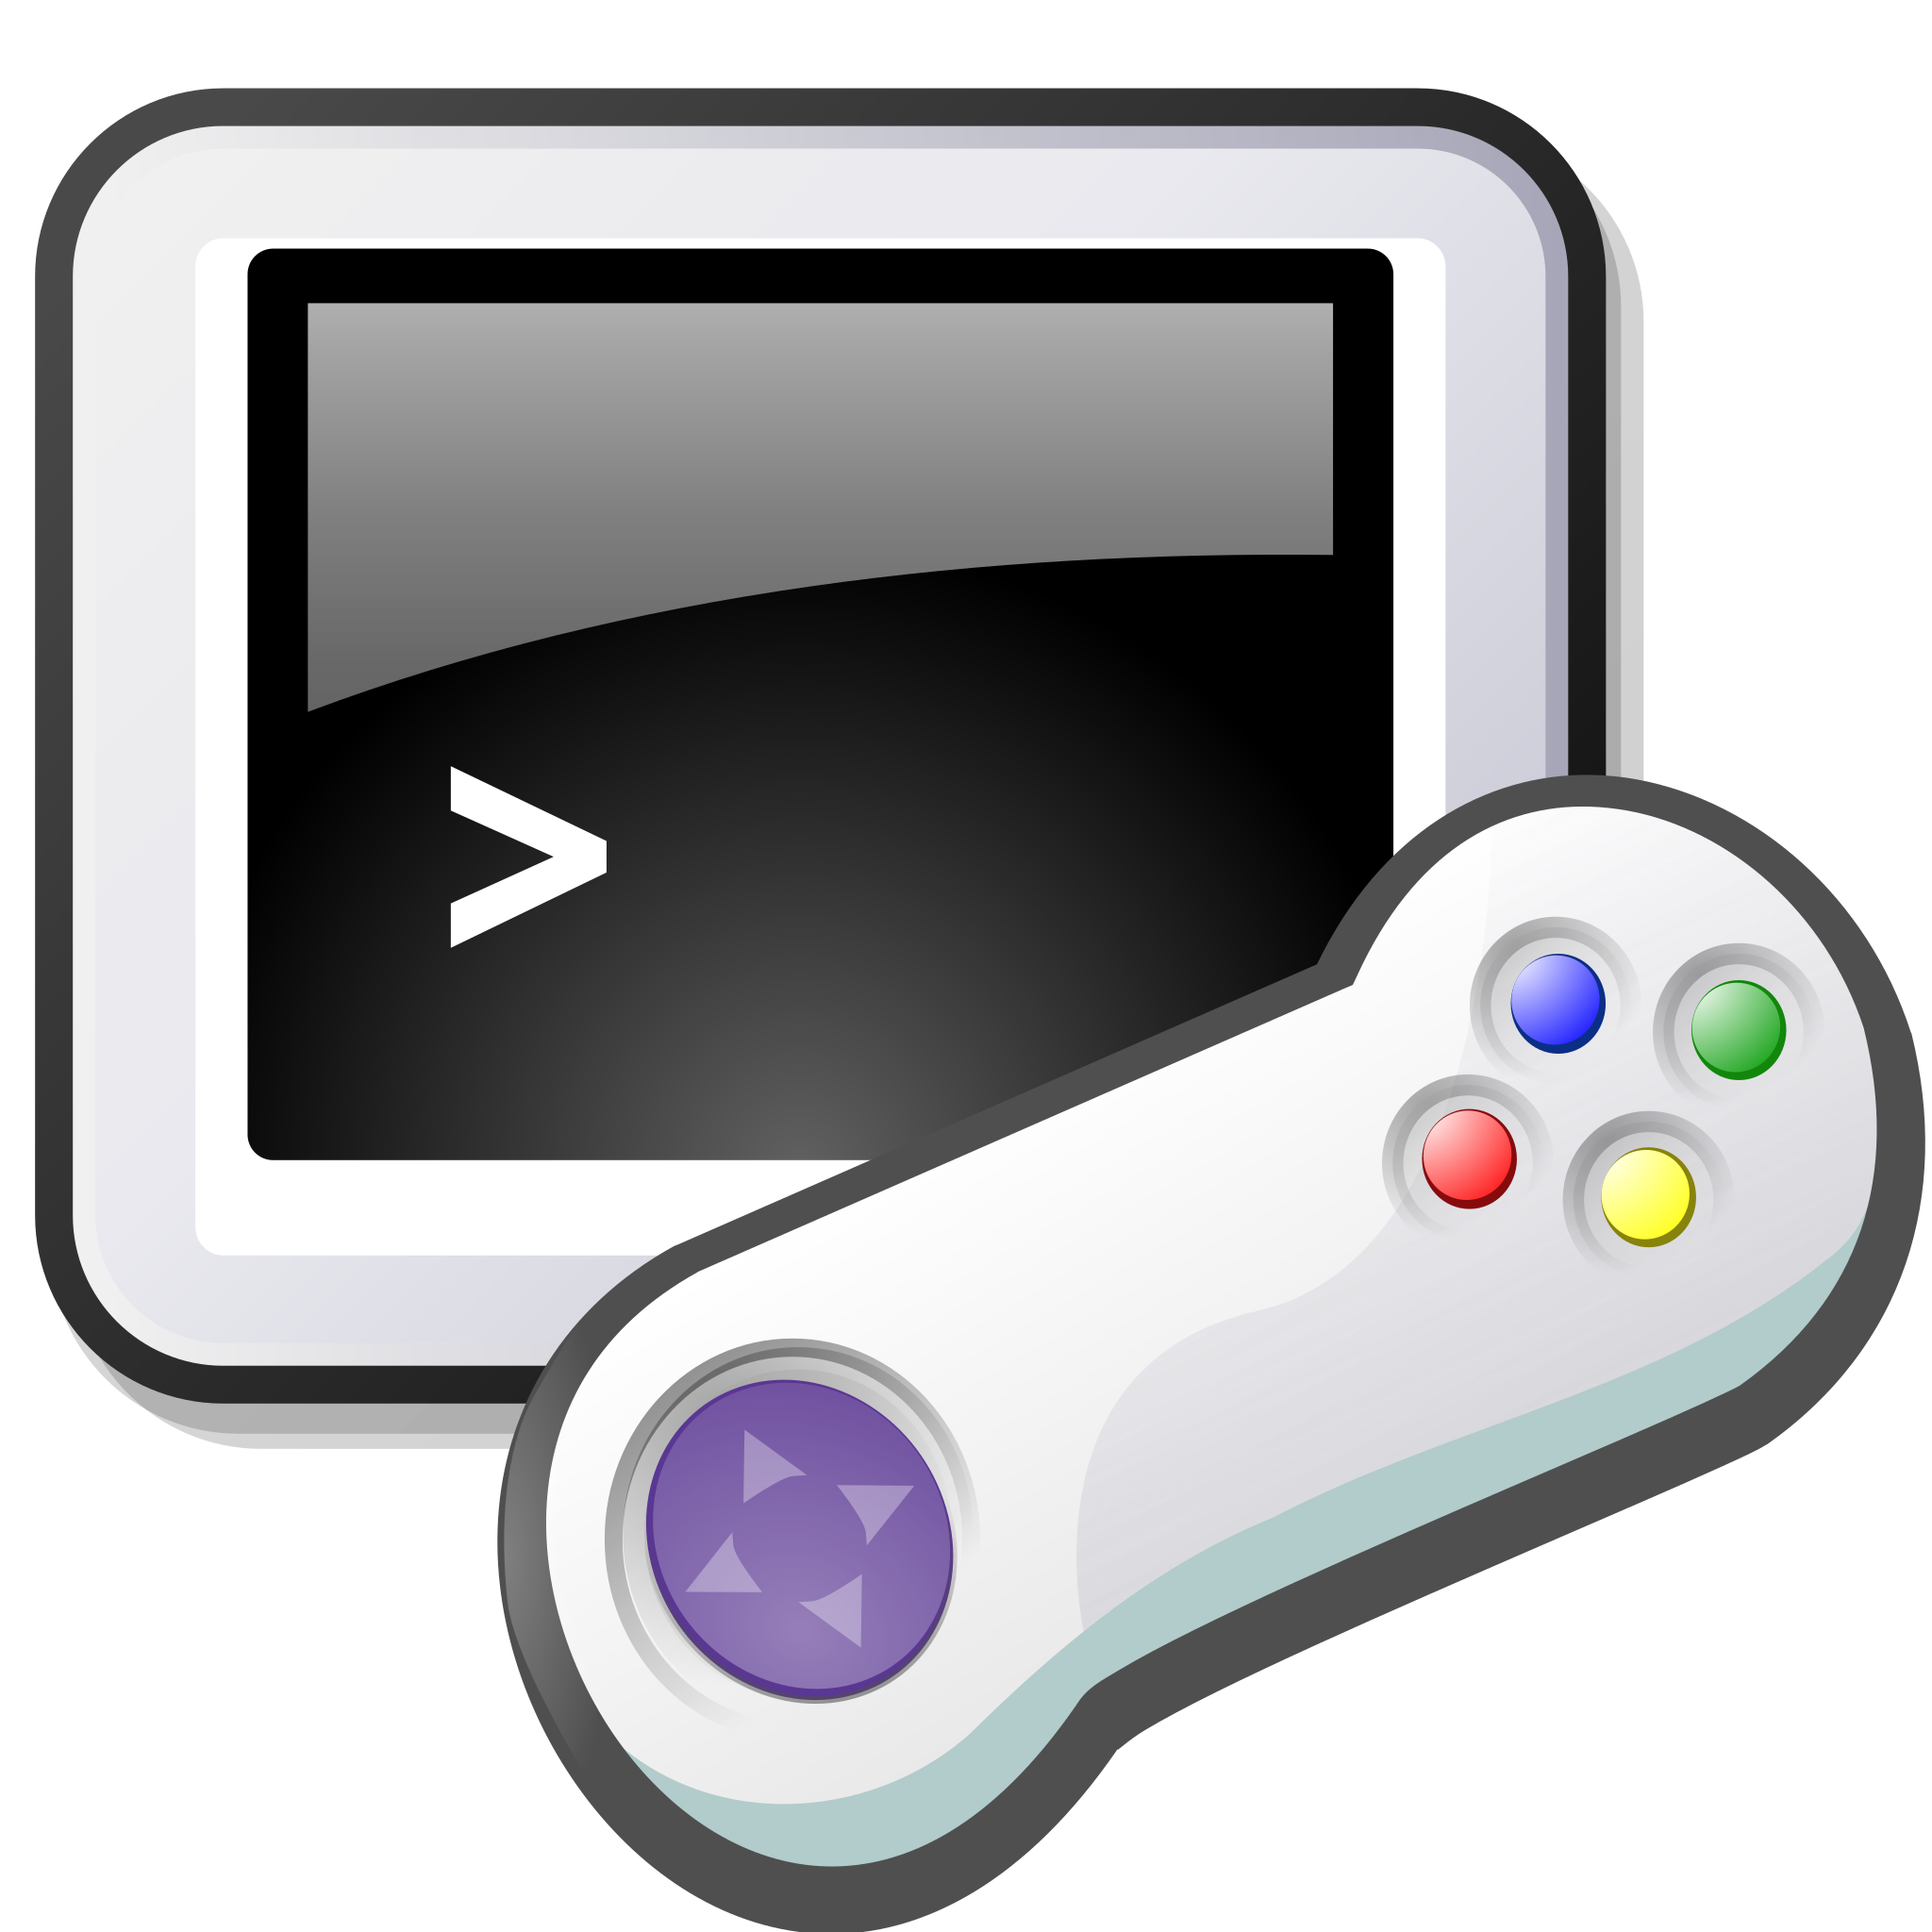 Old video game console icon